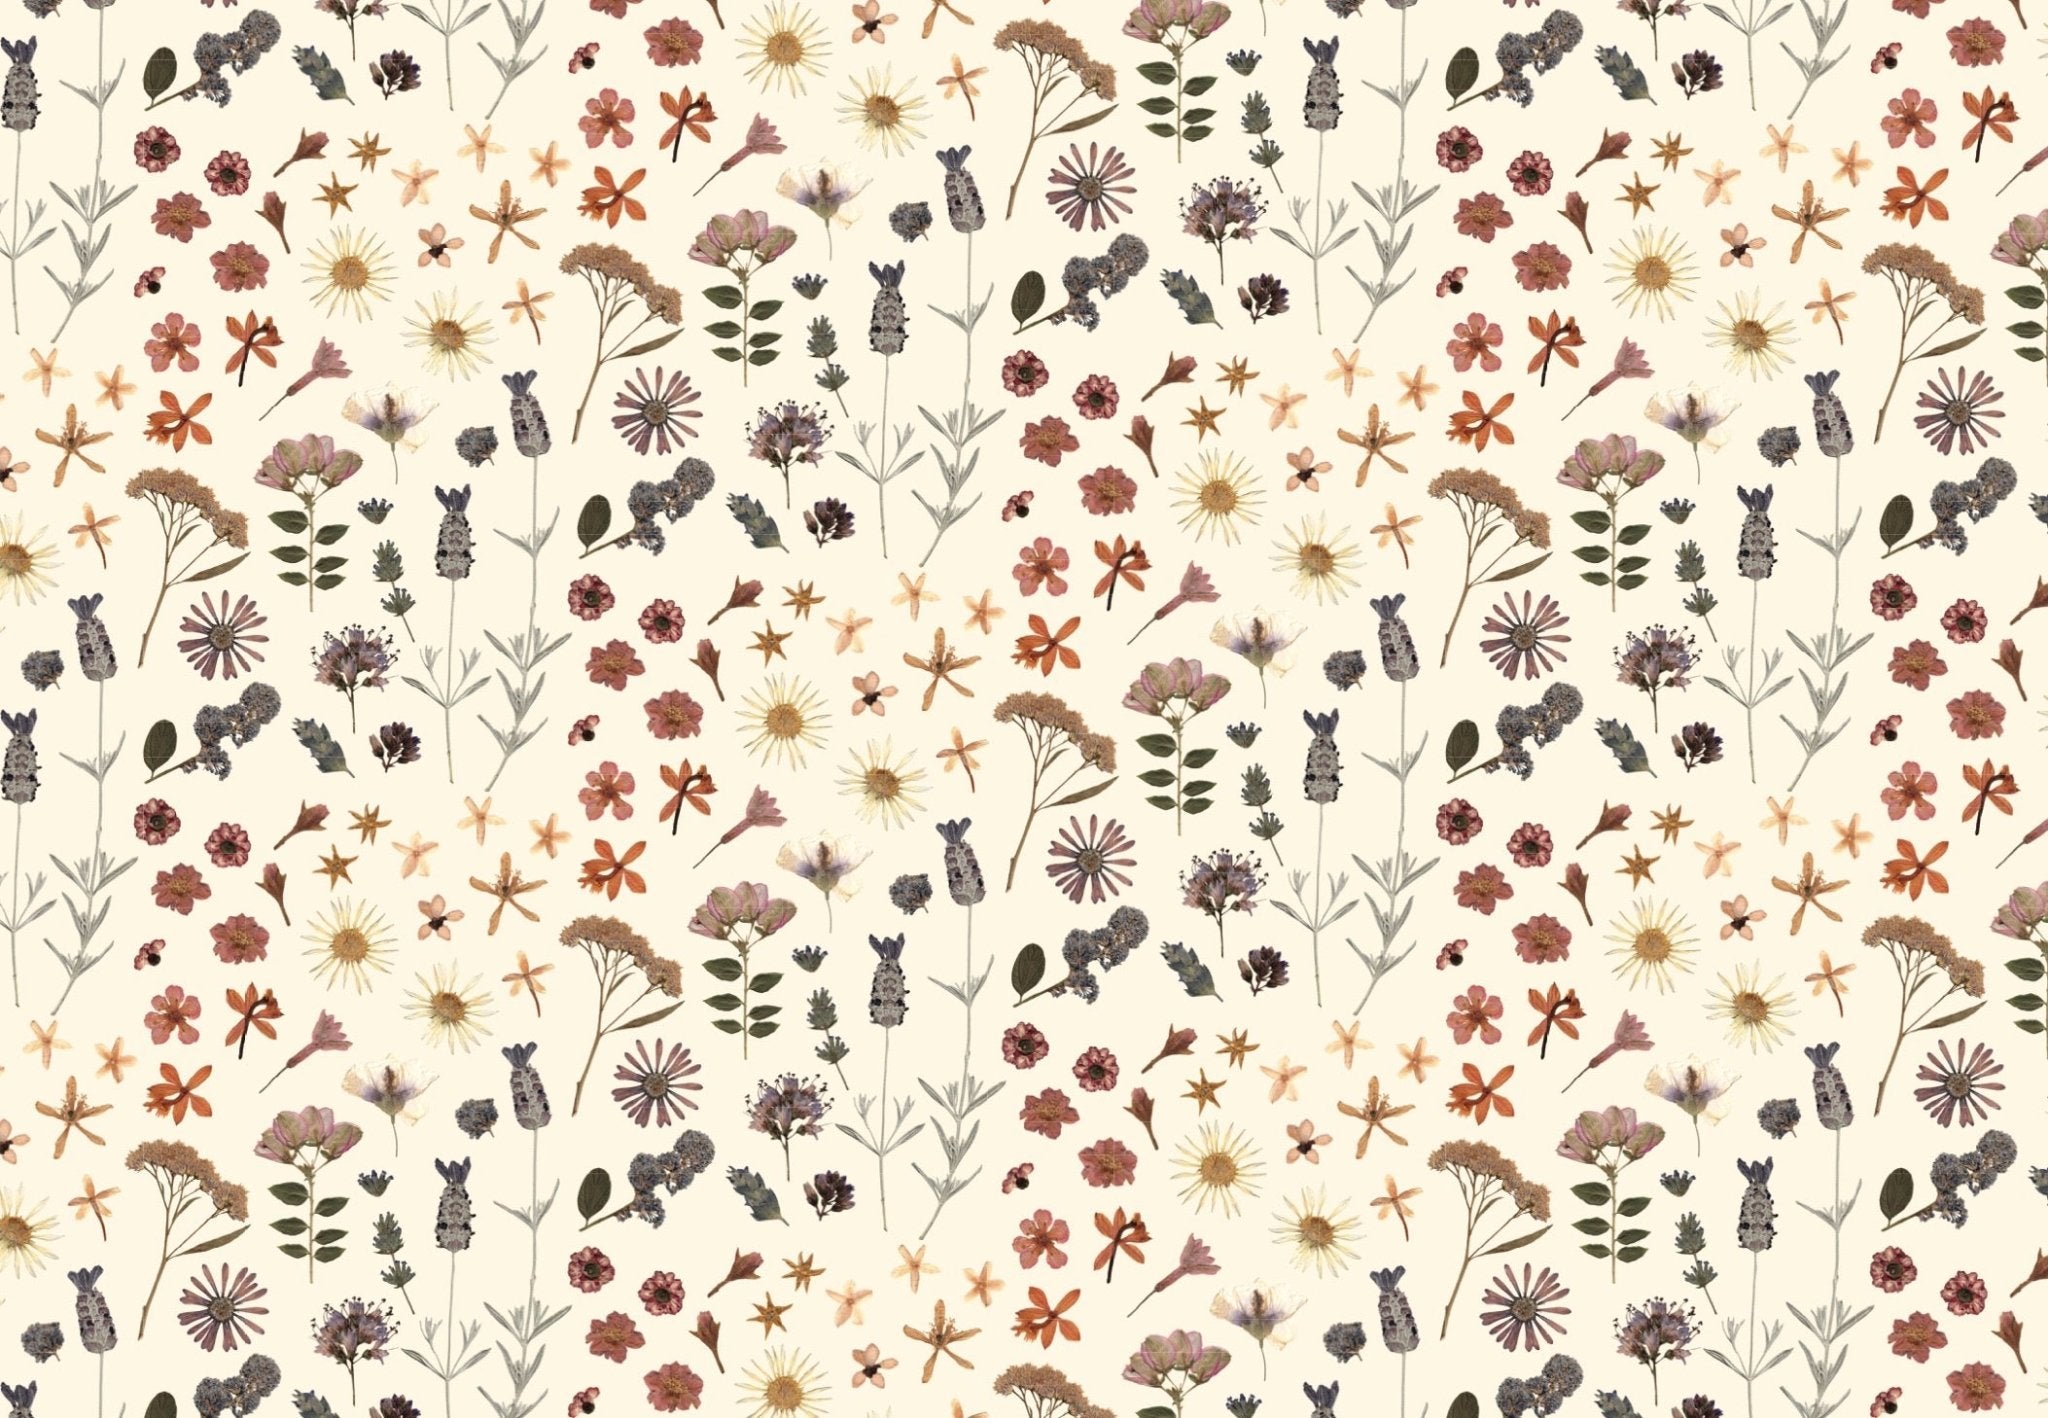 Adelfi gift wrap featuring a dried flower pattern scattered on a cream background.